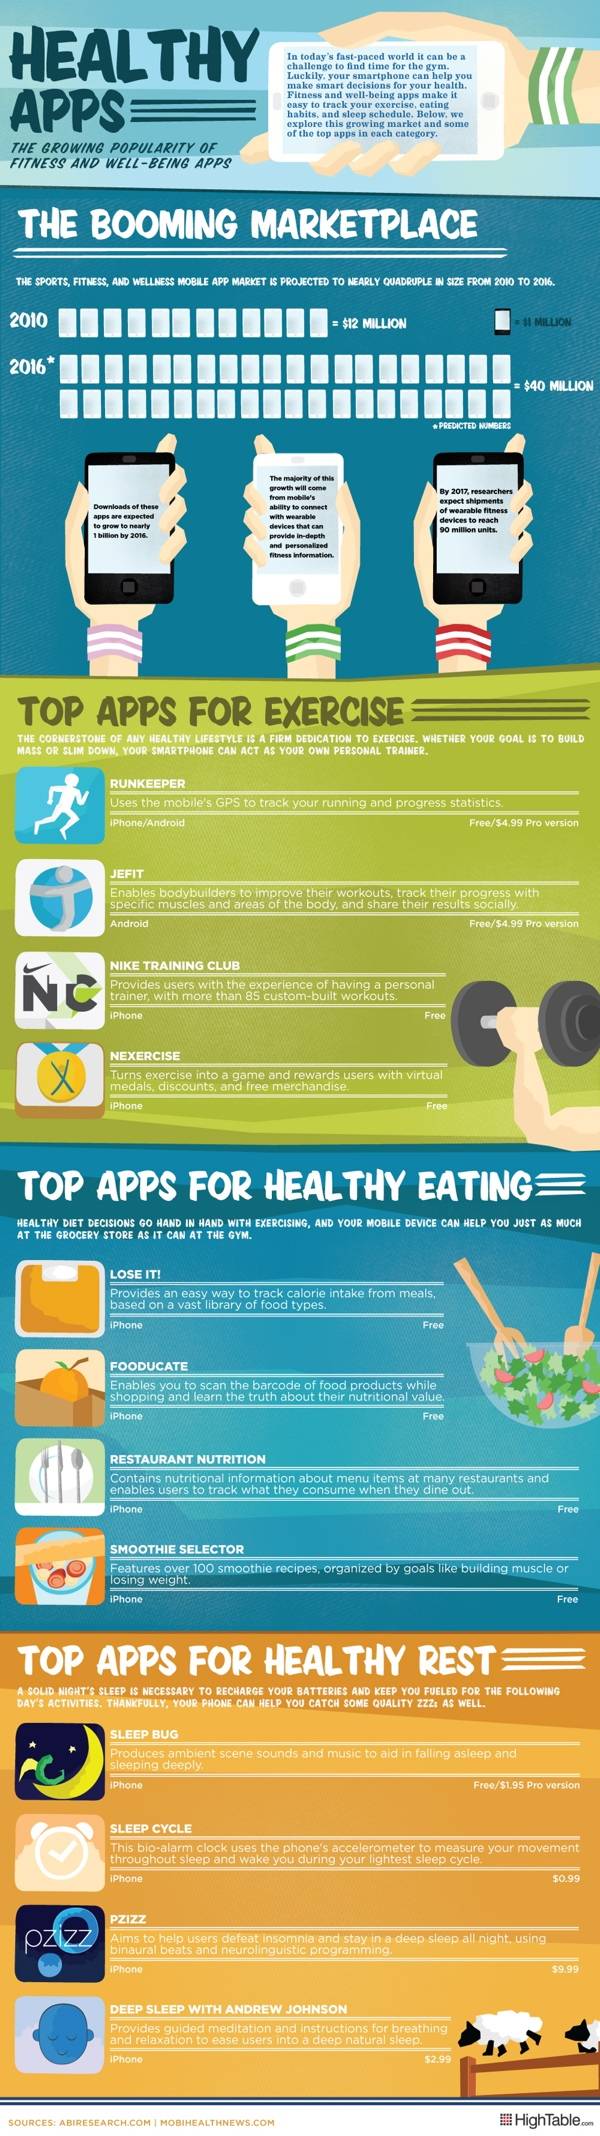 healthyapps